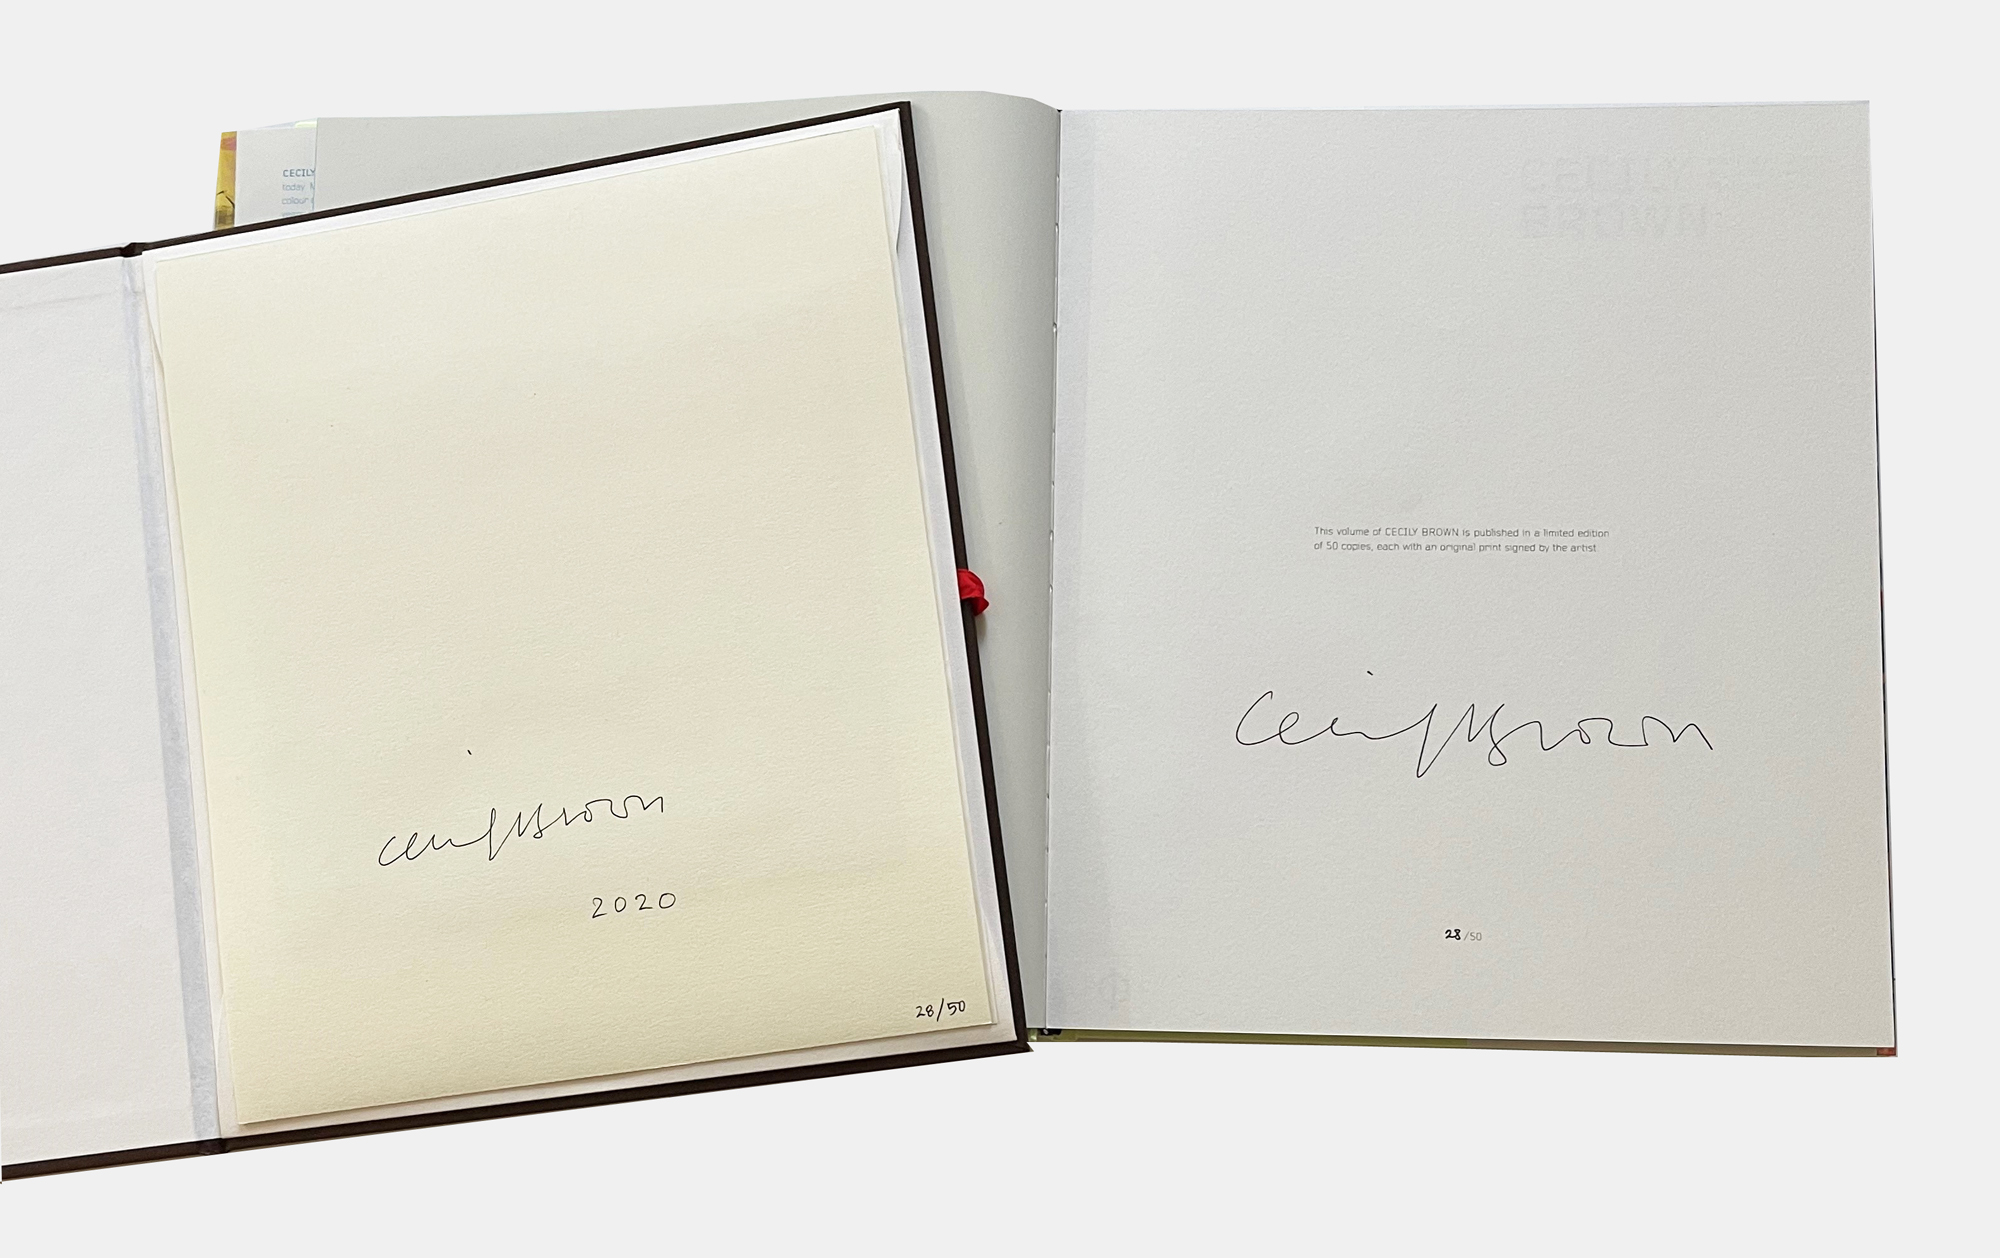 Cecily Brown's signature on the reverse of the edition and in the accompanying